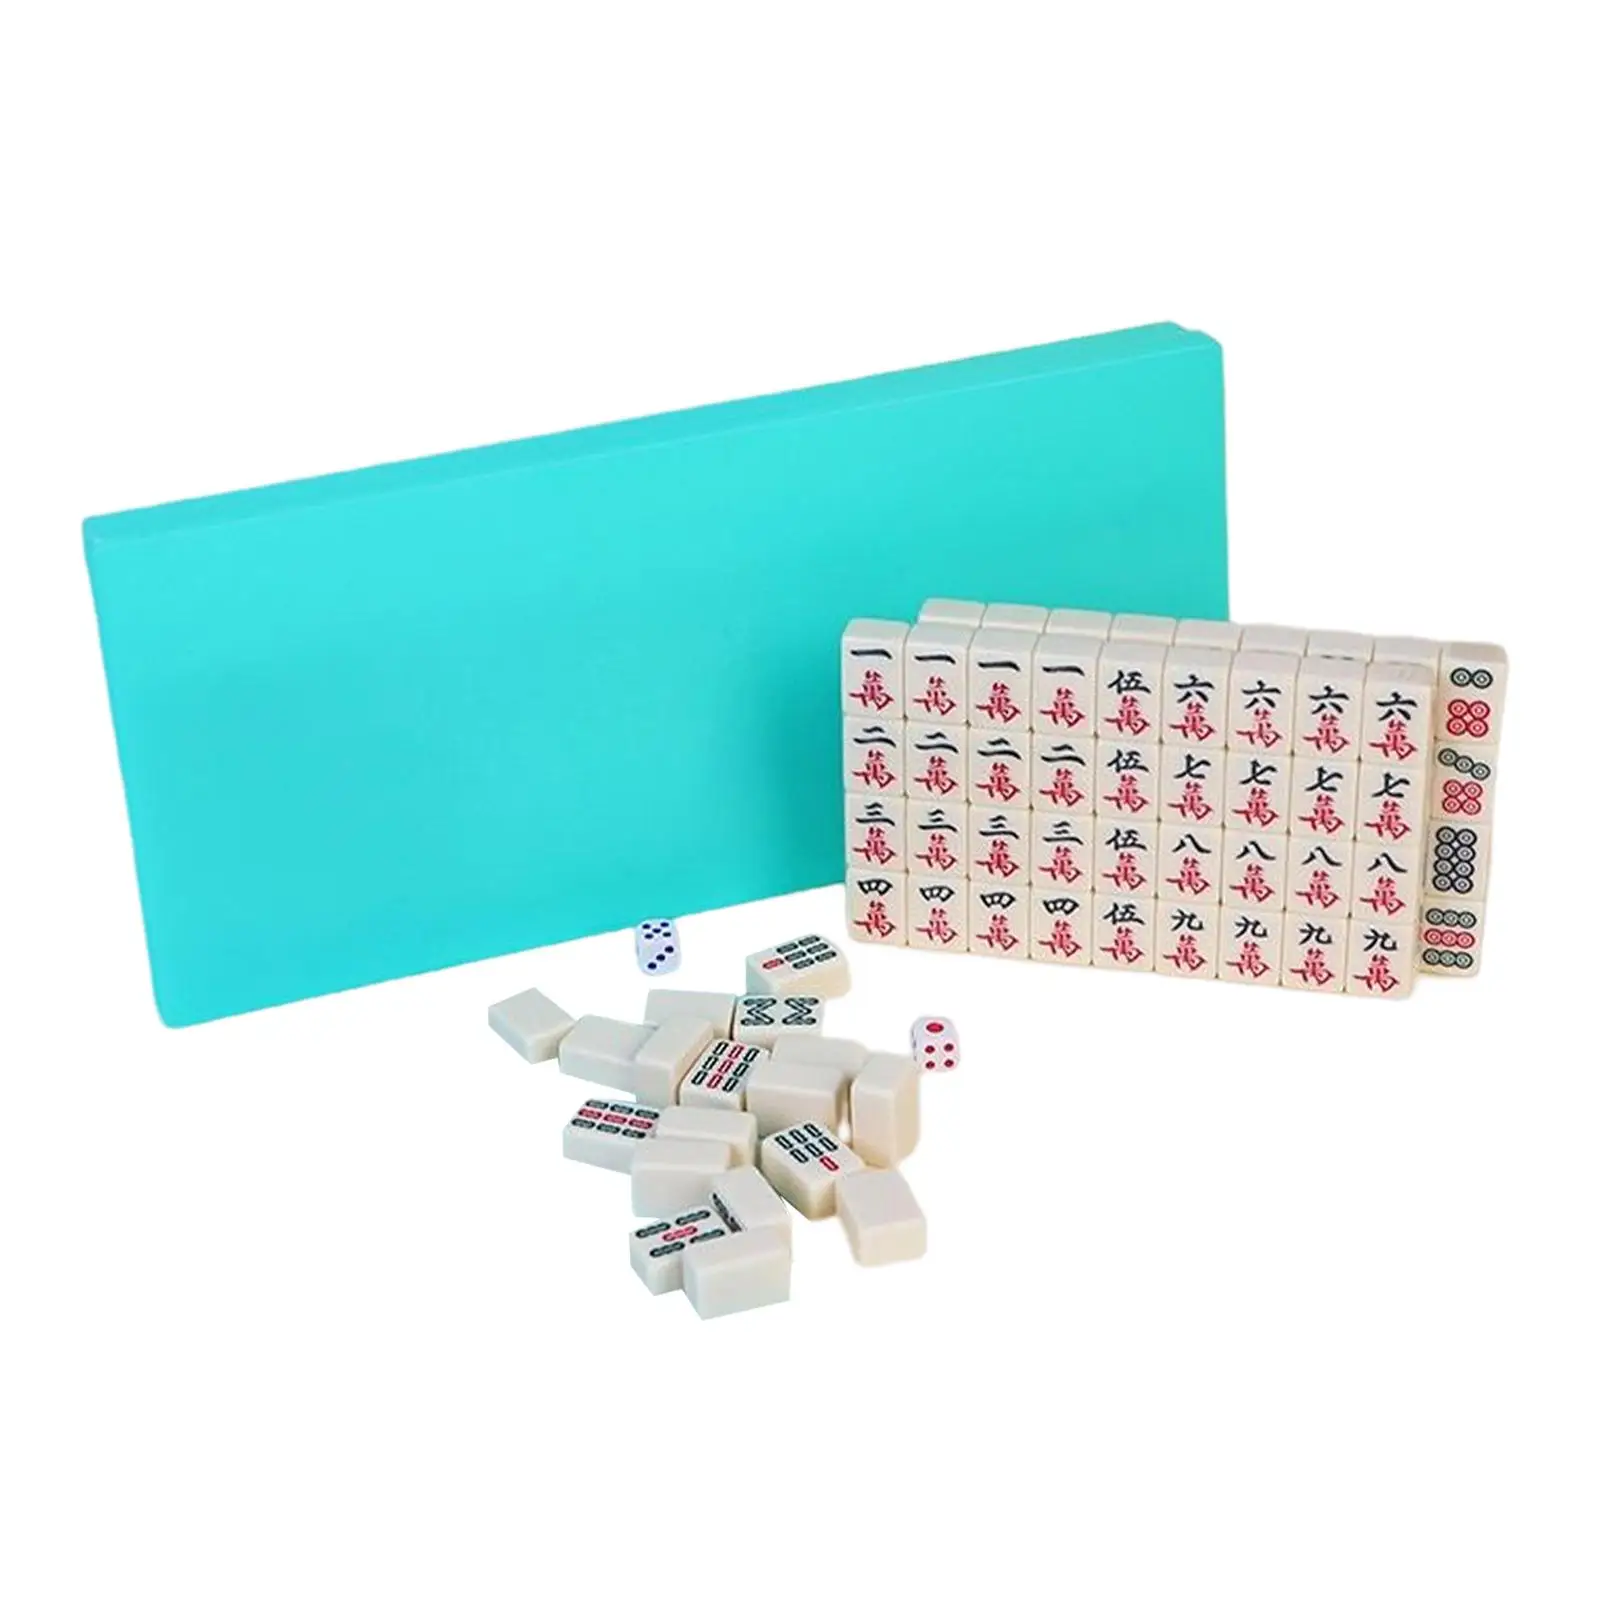 Portable Chinese Mini Mahjong Game Set Table Game Activity Game for Travel